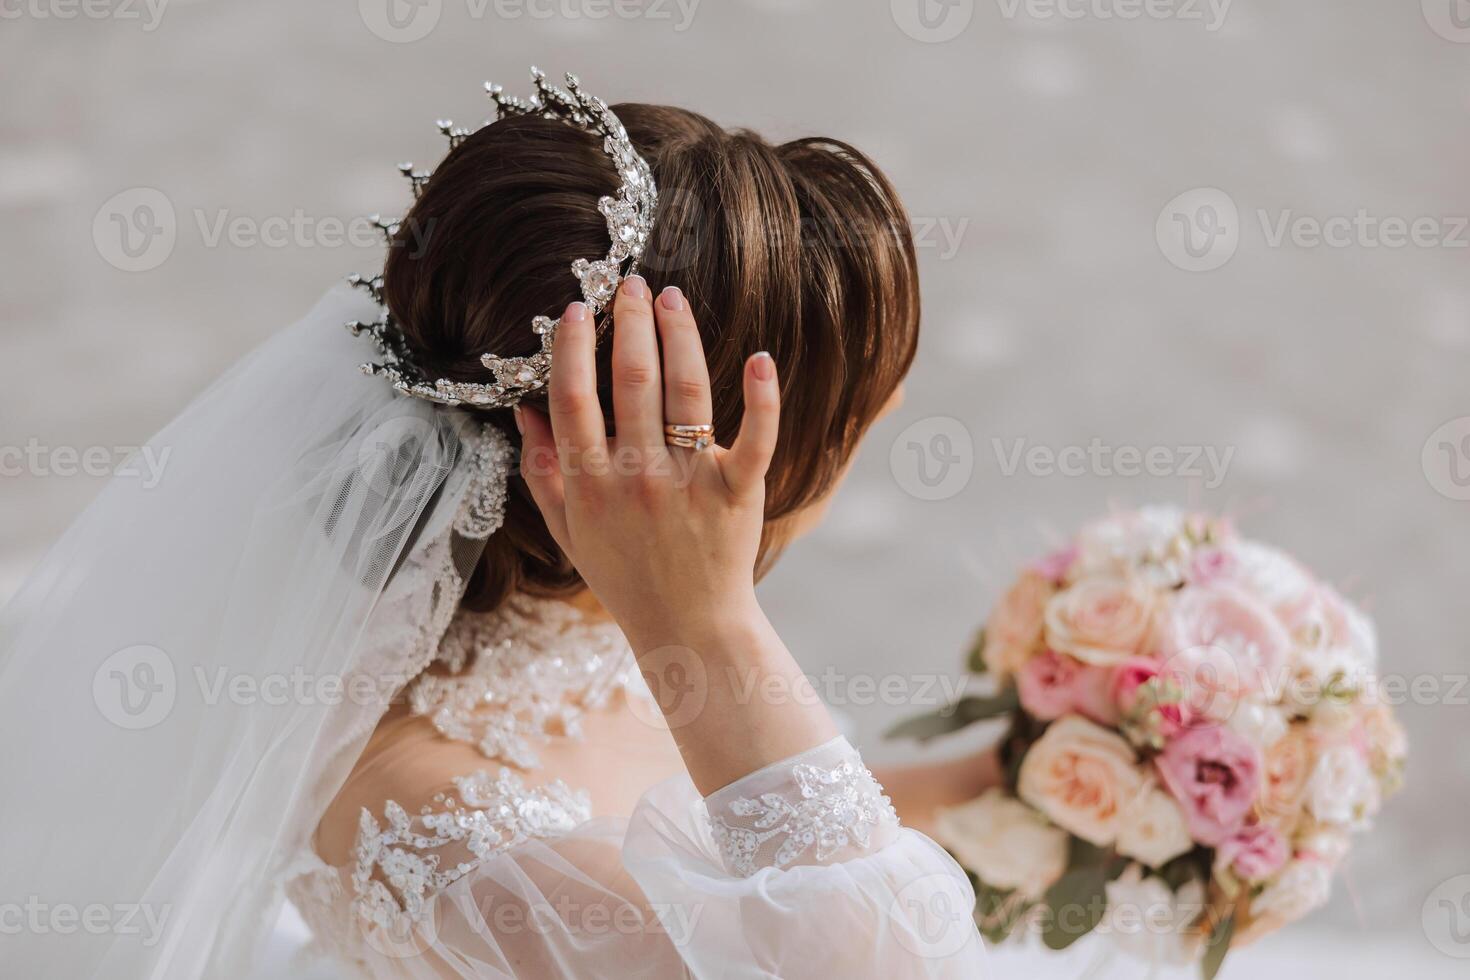 brunette bride in off-the-shoulder lace white dress and tiara posing with a bouquet of white and pink flowers. Beautiful hair and makeup. Spring wedding photo